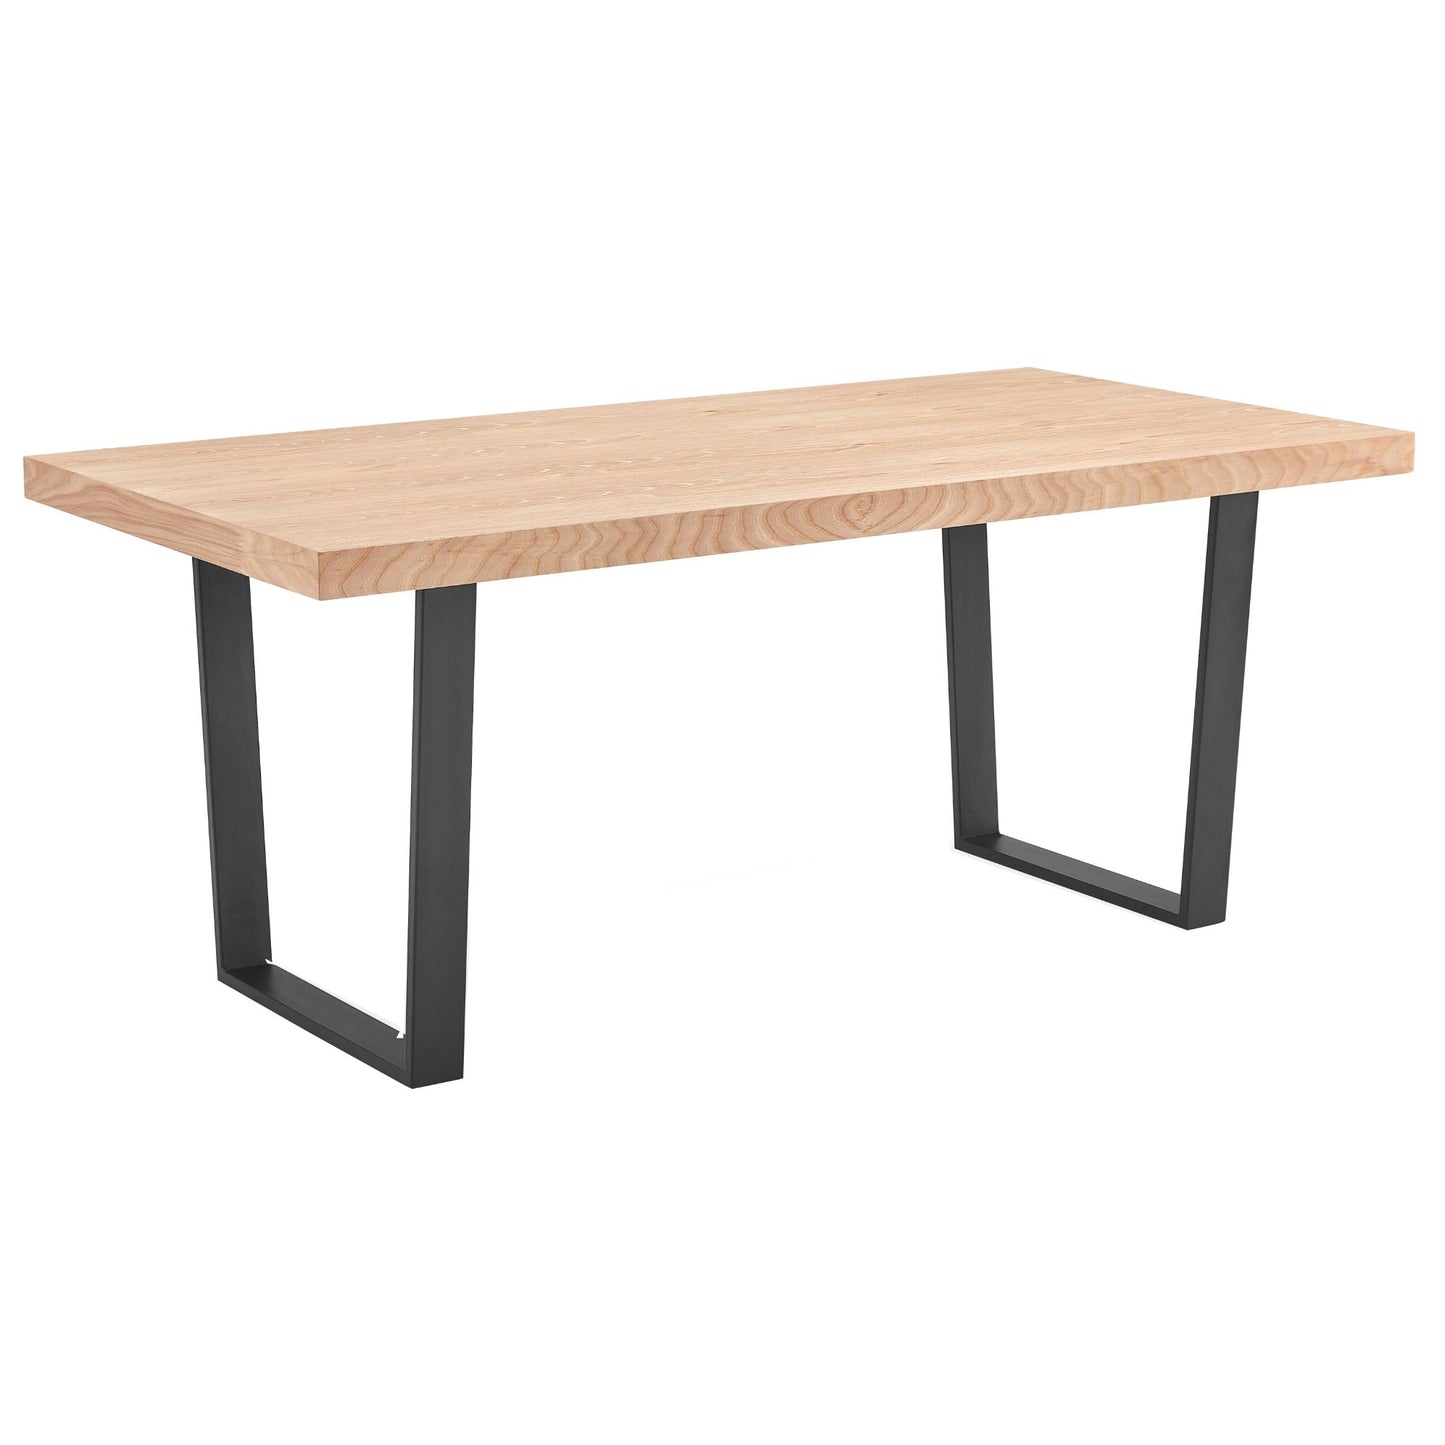 Elm Timber Wood Dining Table with Black Metal Leg 180cm- Natural